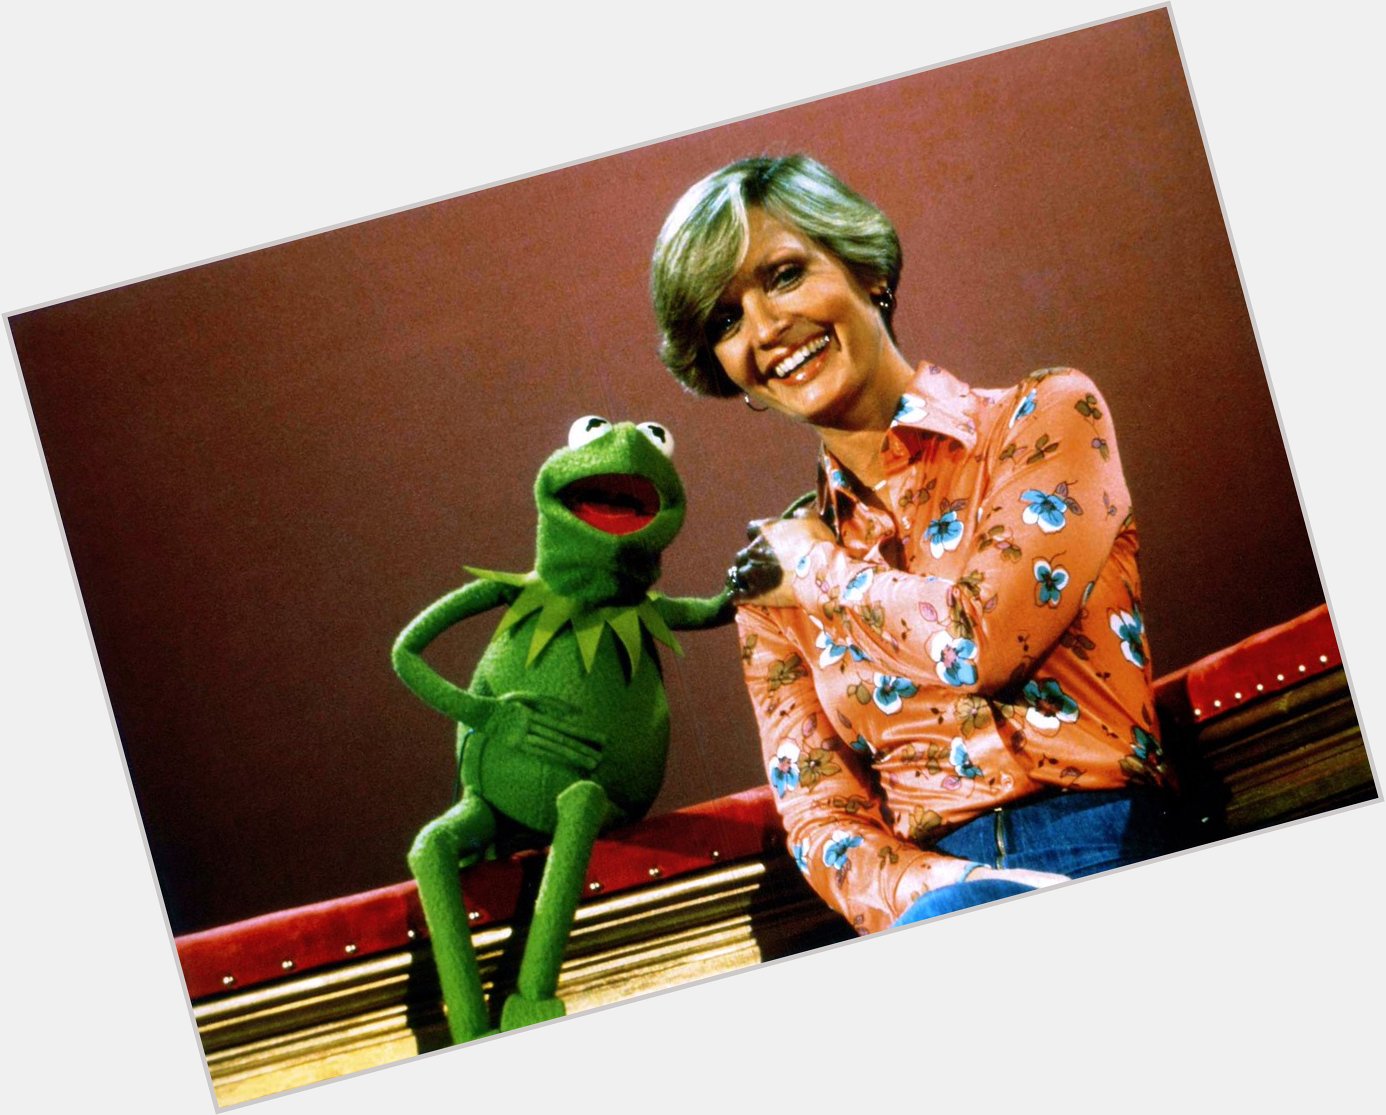 Happy birthday (RIP) to a true icon of the small screen, the warm and wonderful Florence Henderson! 